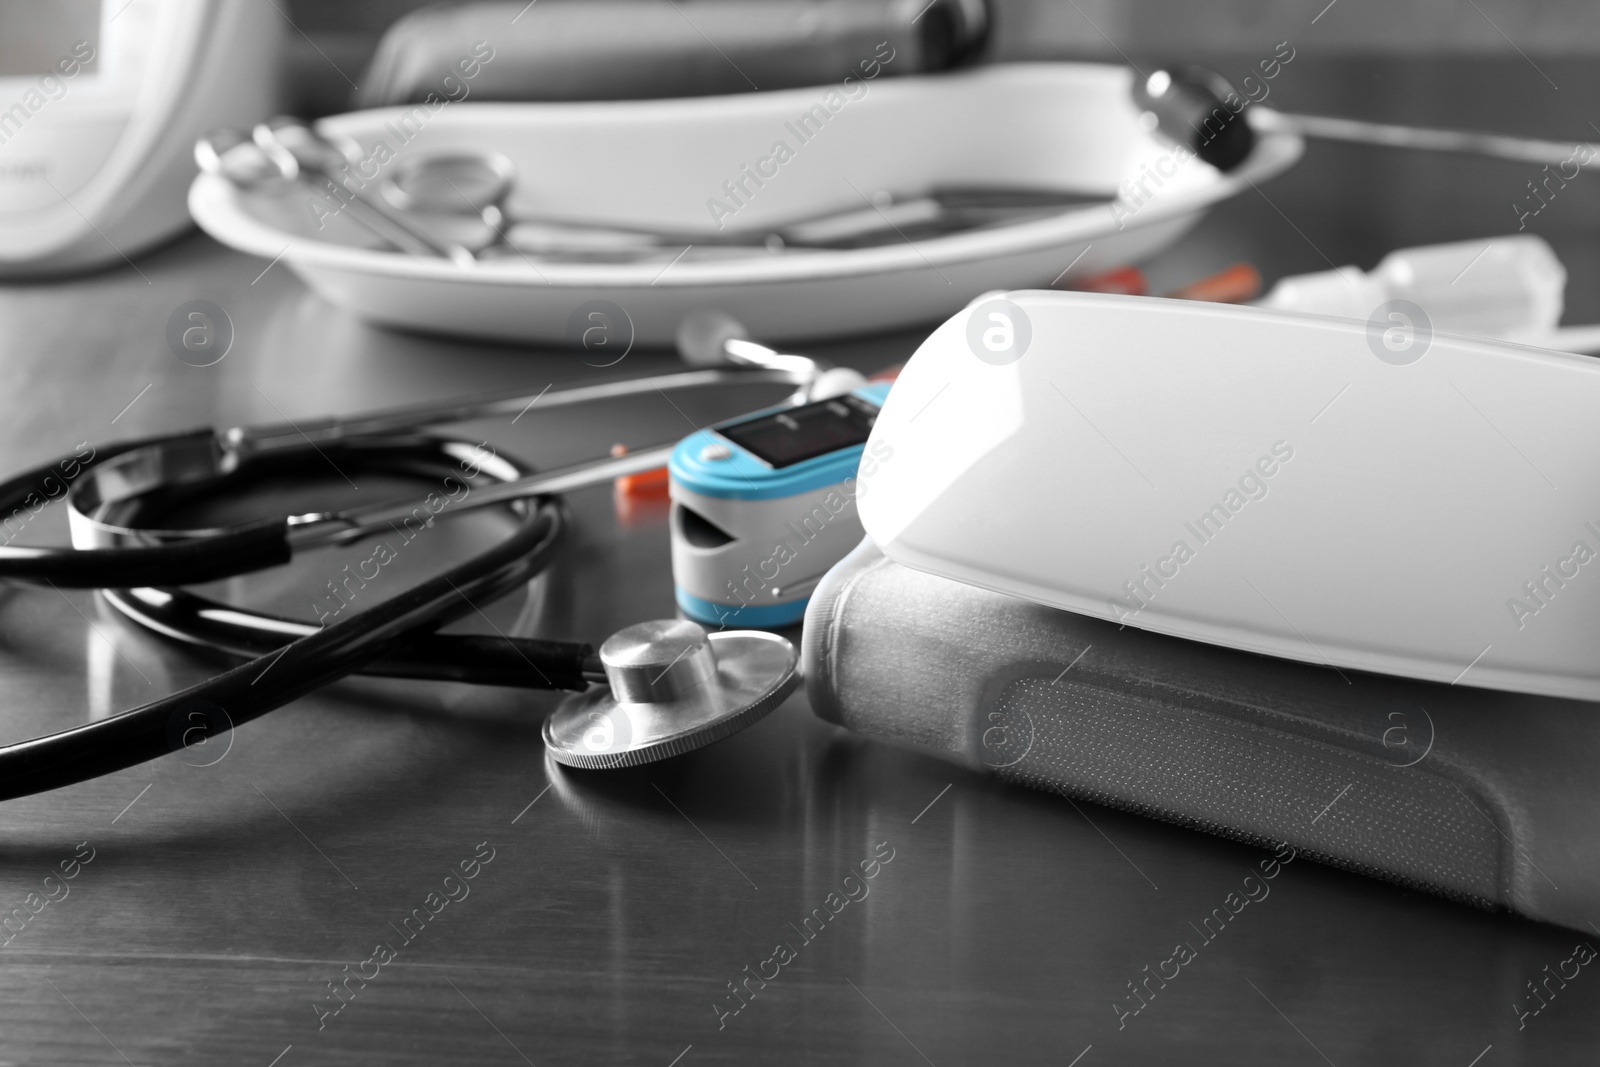 Photo of Sphygmomanometer, stethoscope and blood pressure monitor on grey table. Medical objects